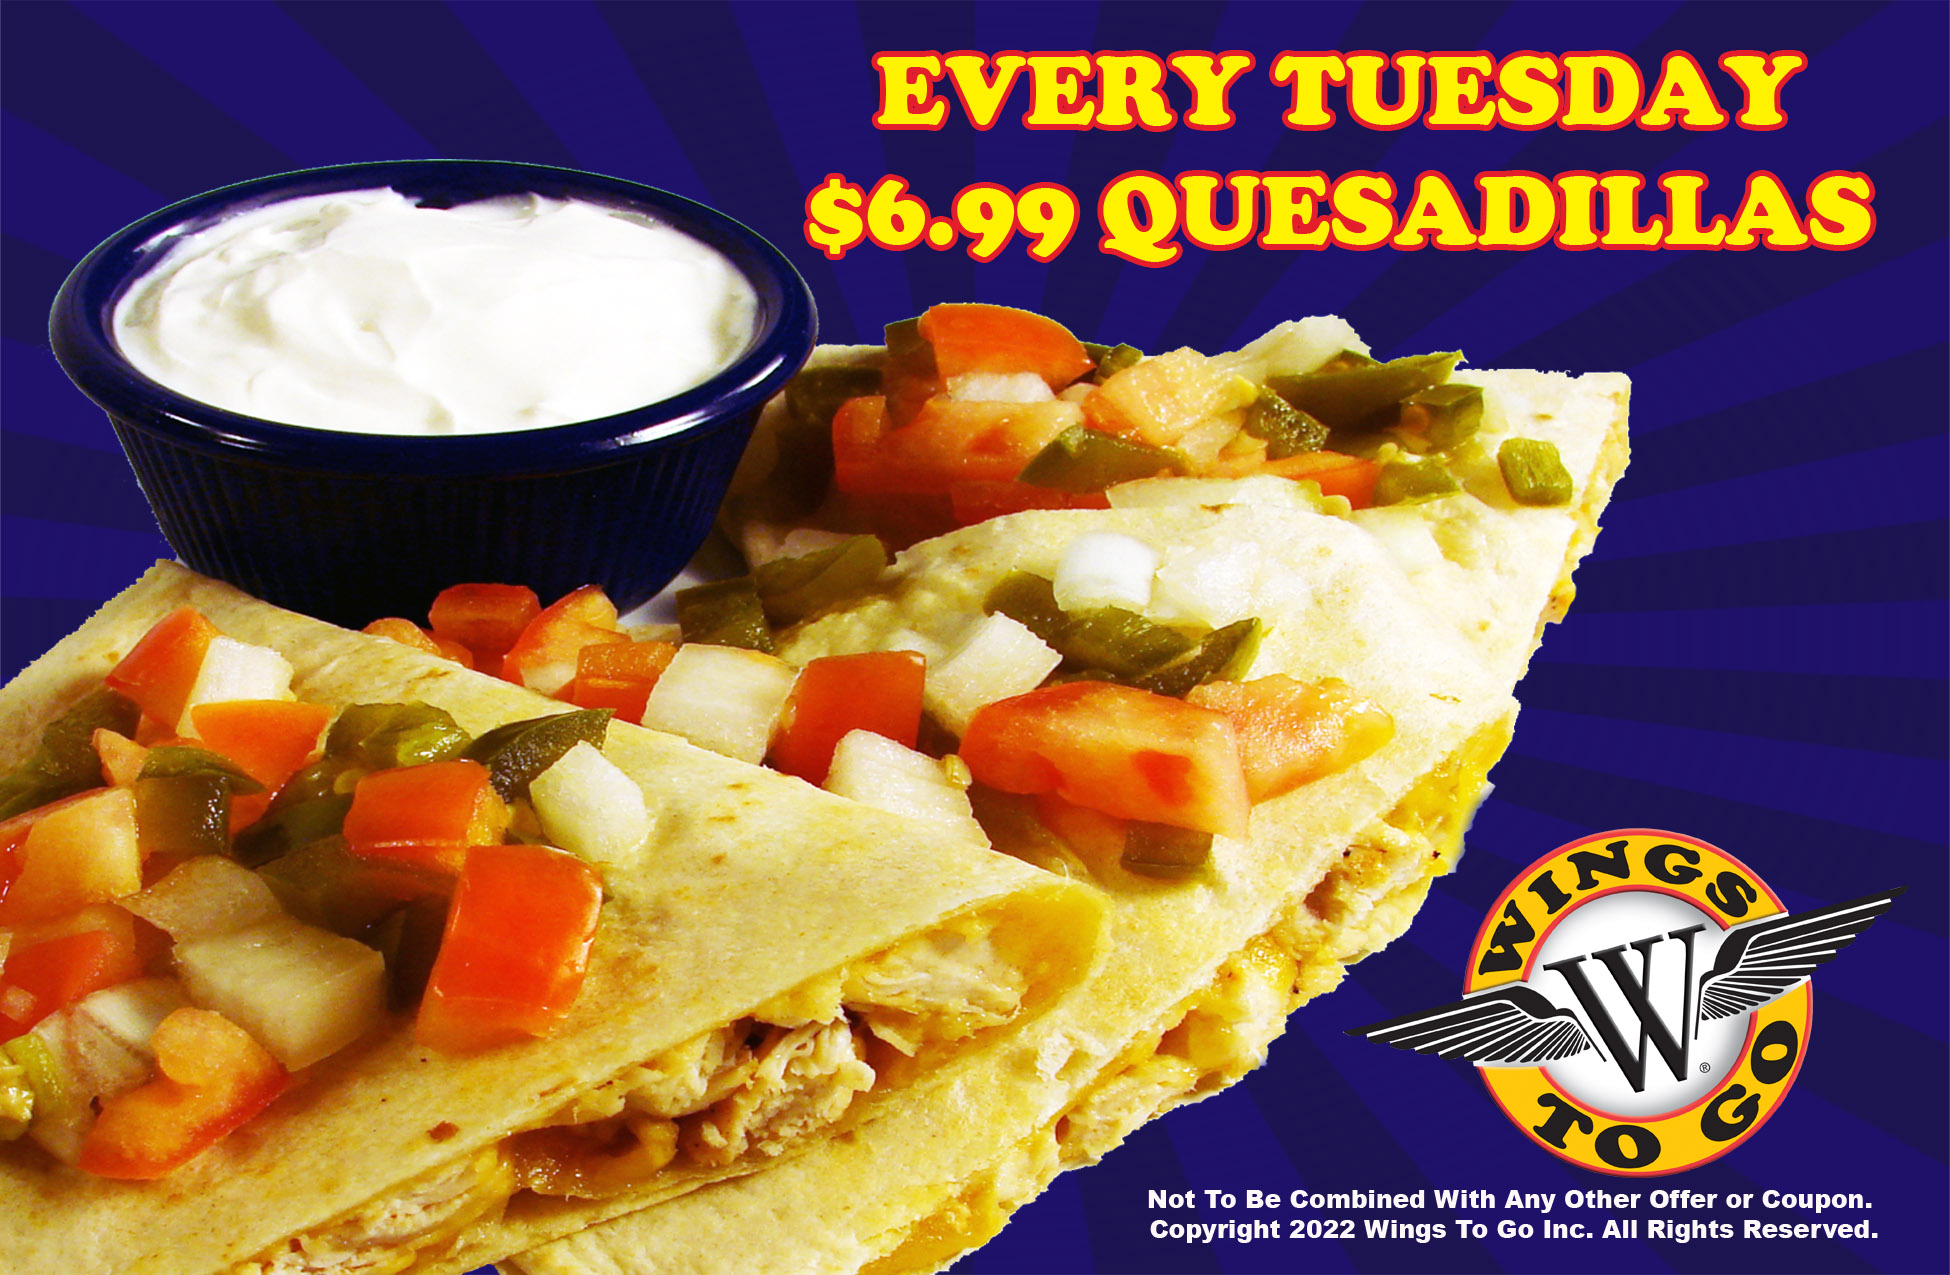 Quesadillas are $6.99 every tuesday